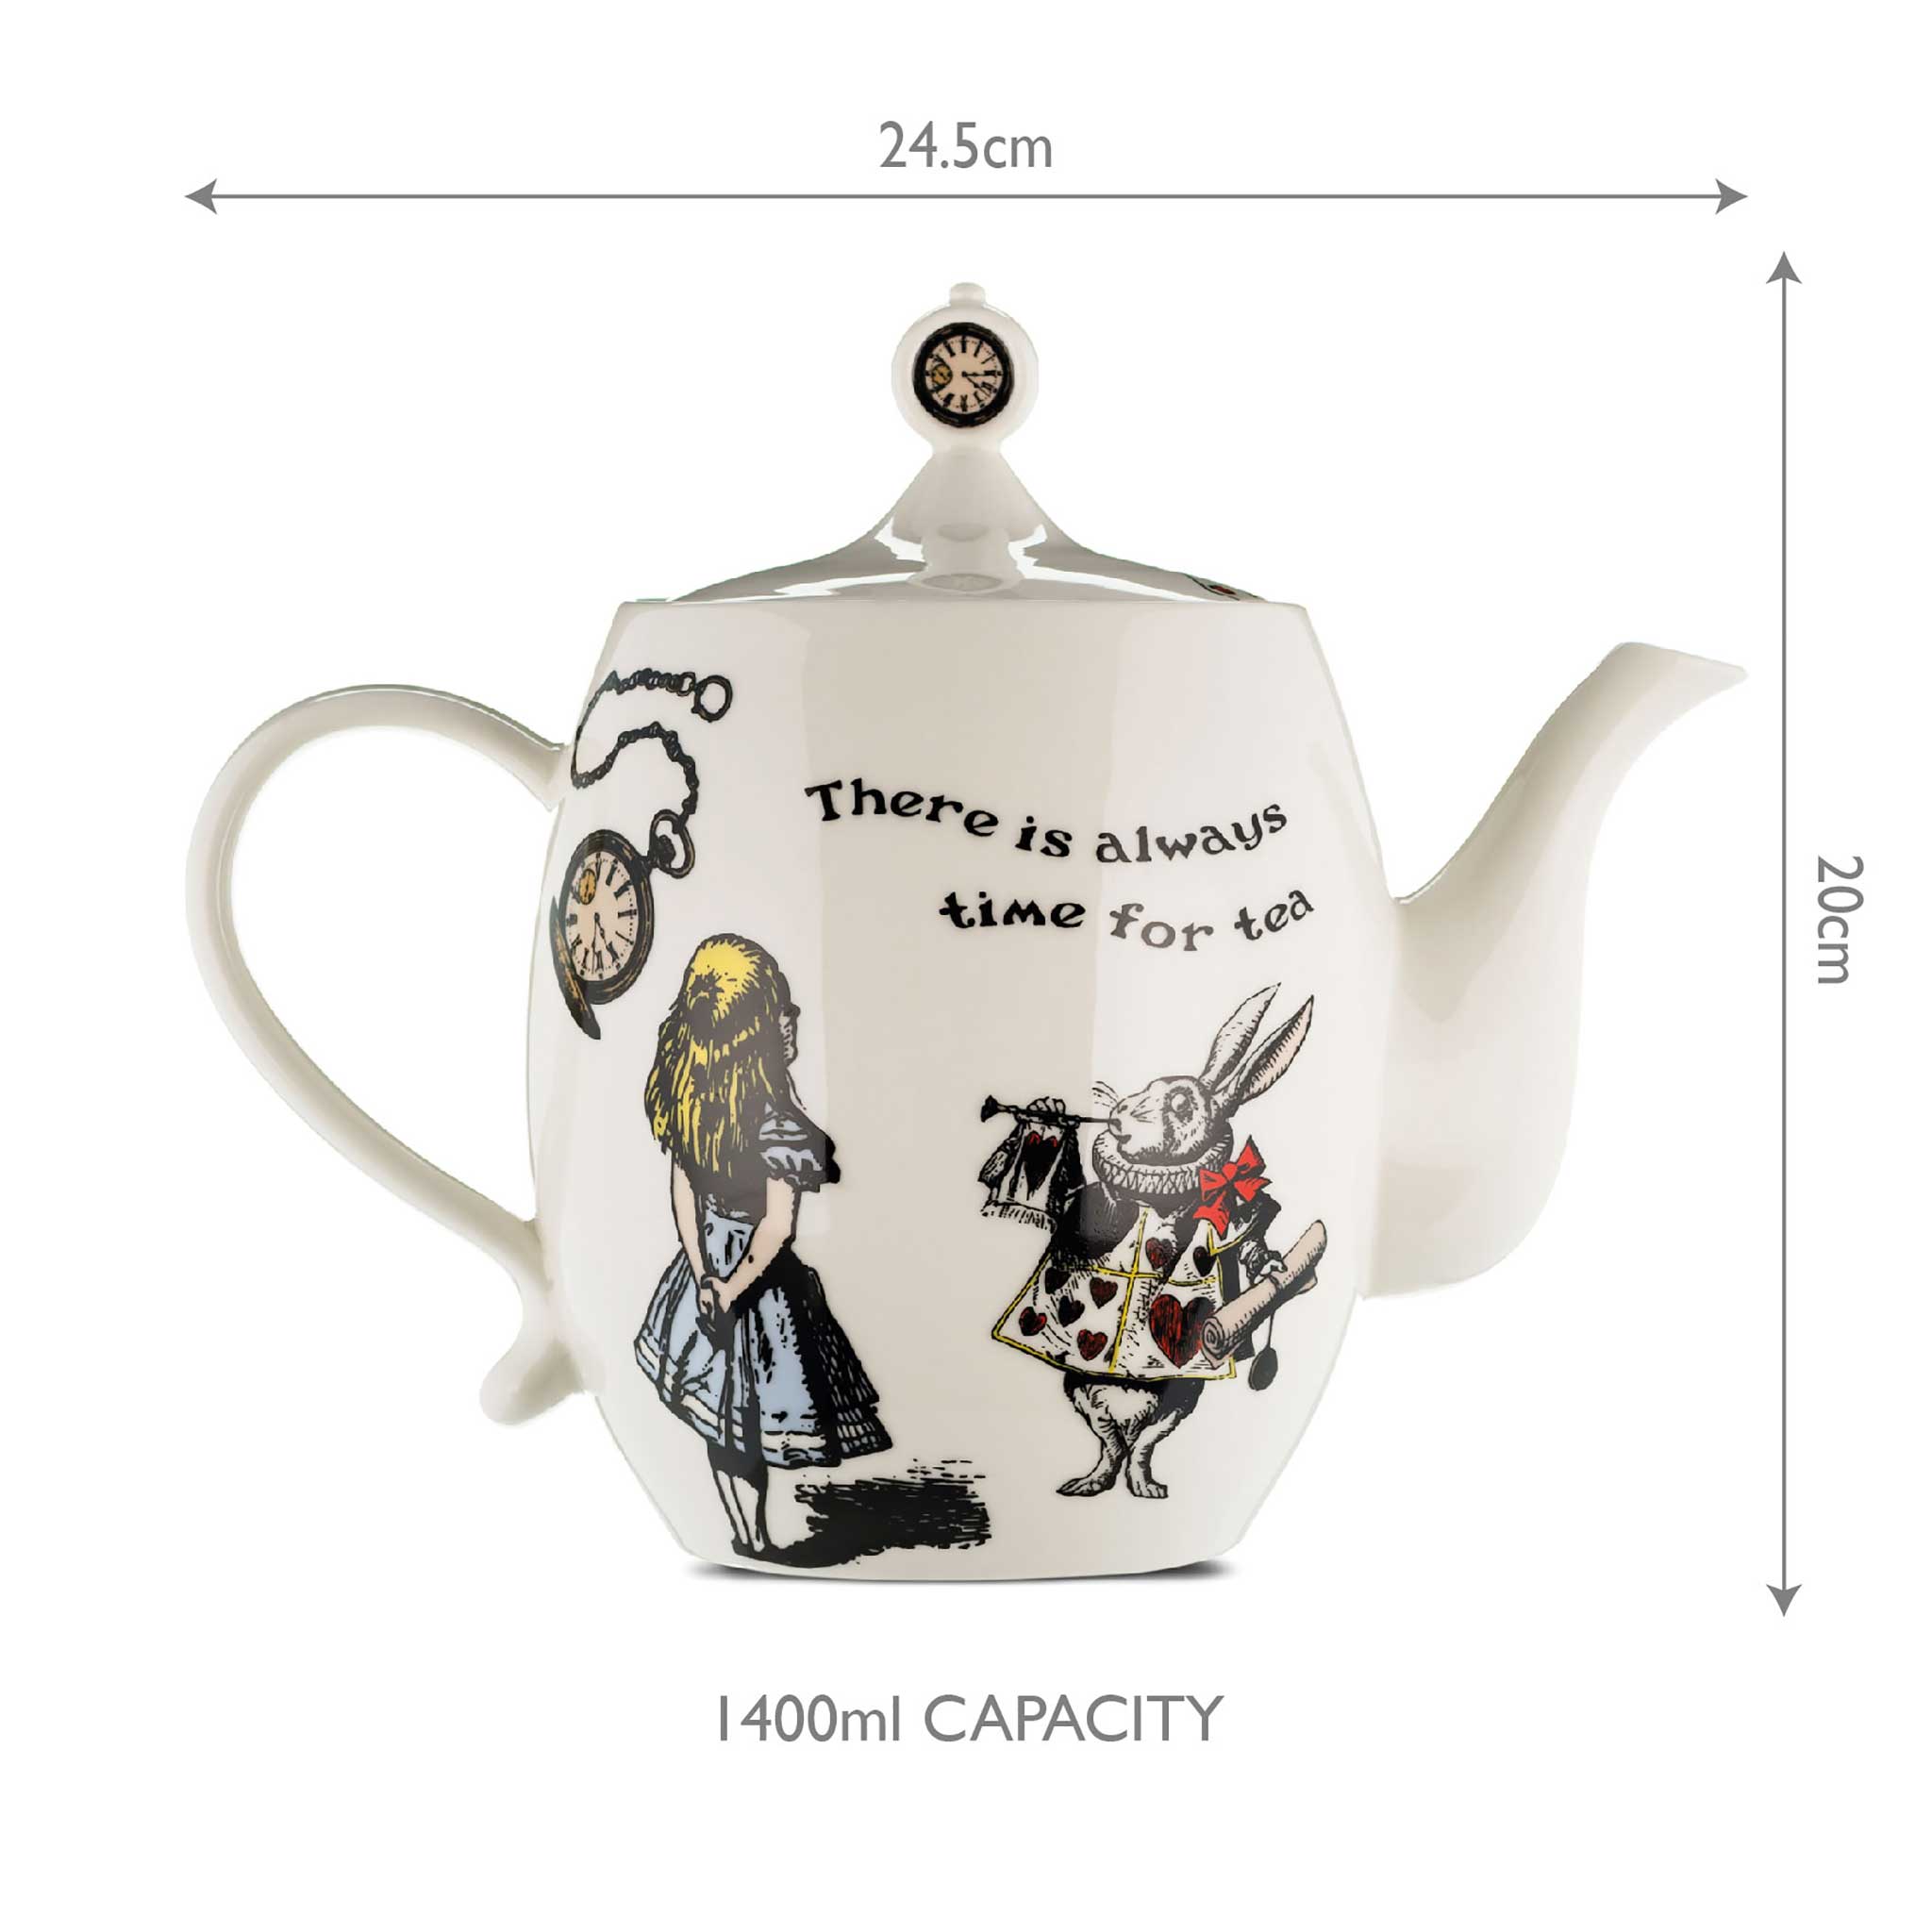 Dimensions - Alice in Wonderland teapot from China Blue